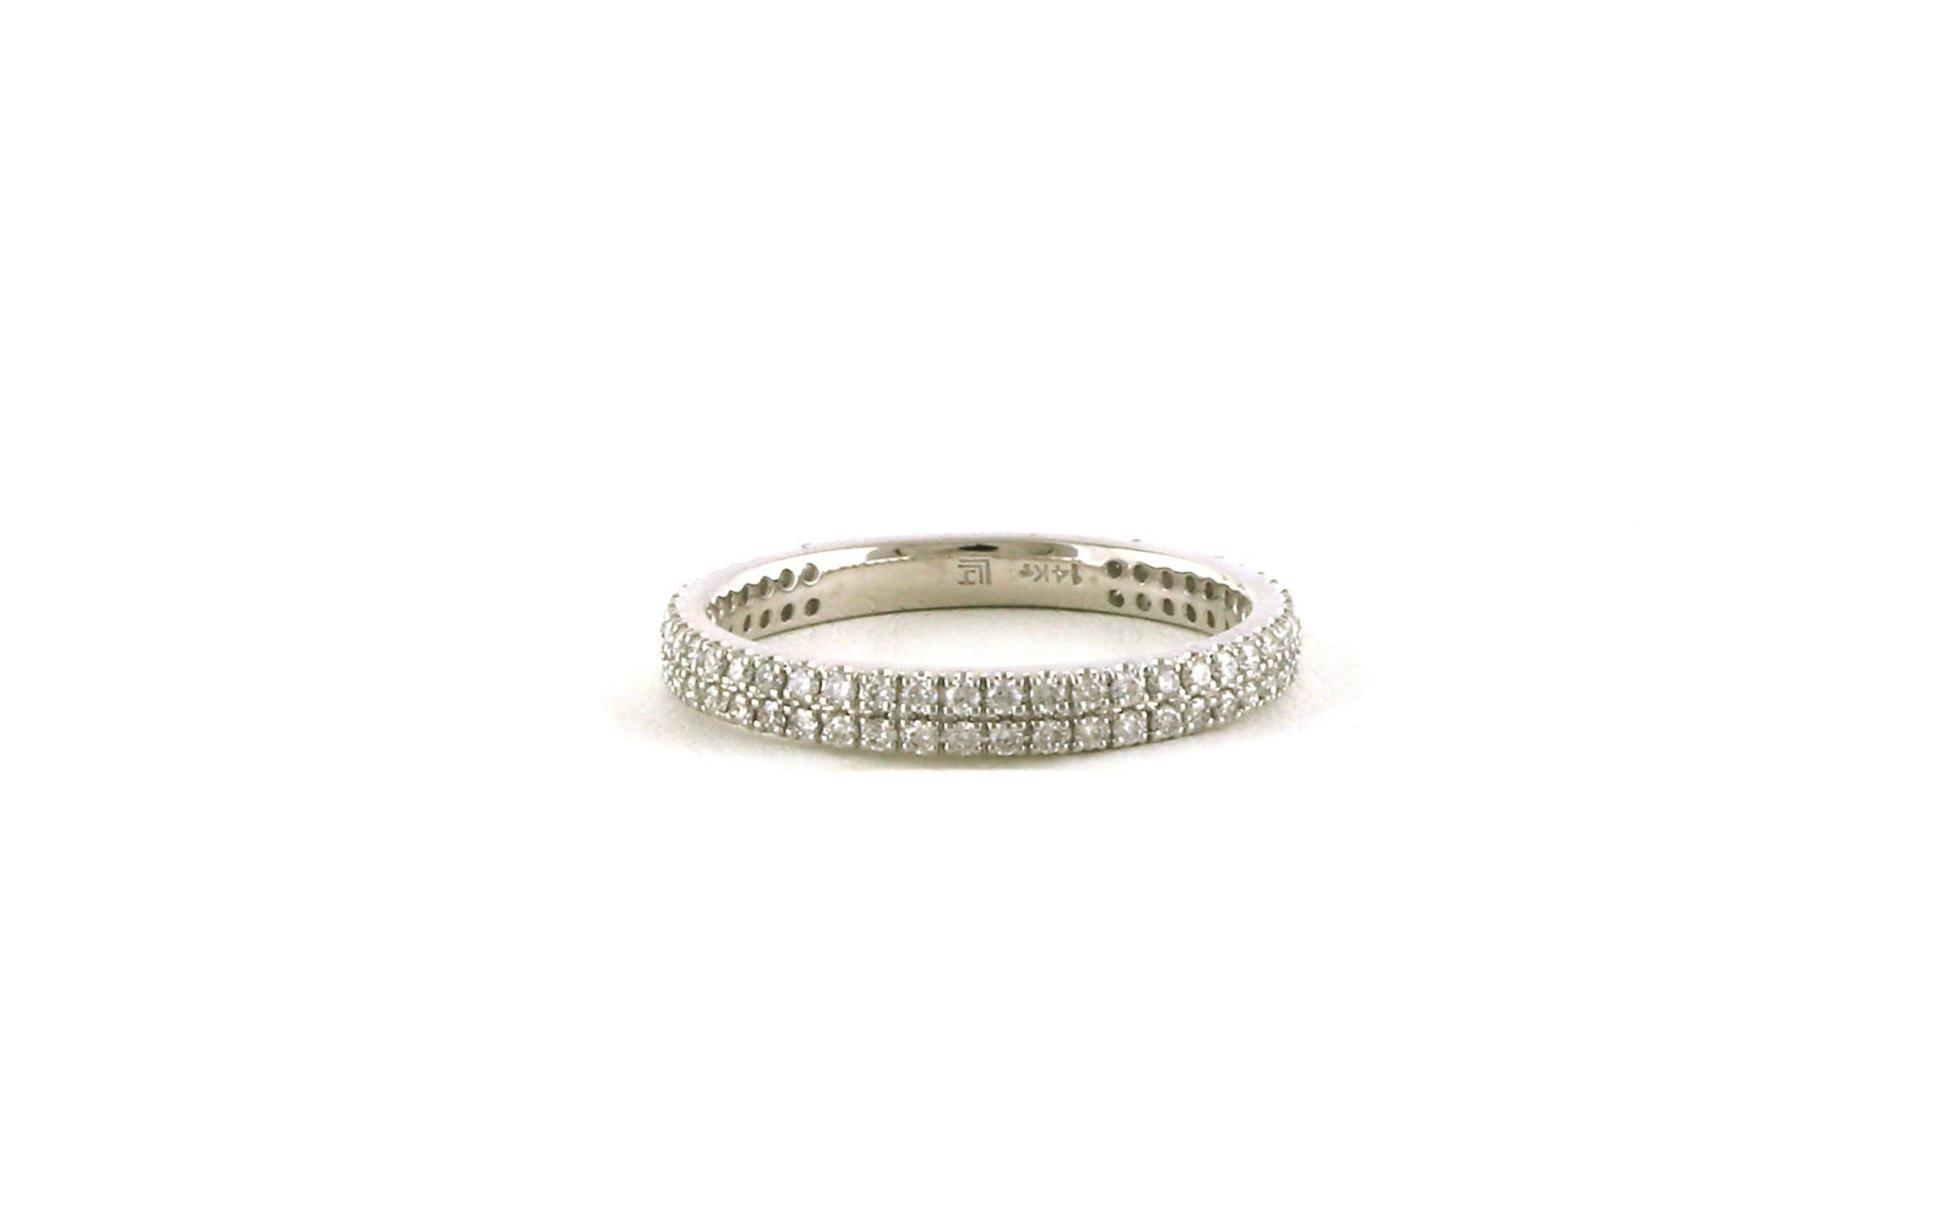 2-Row Graduated Pave Diamond Wedding Band in White Gold (0.60cts TWT)